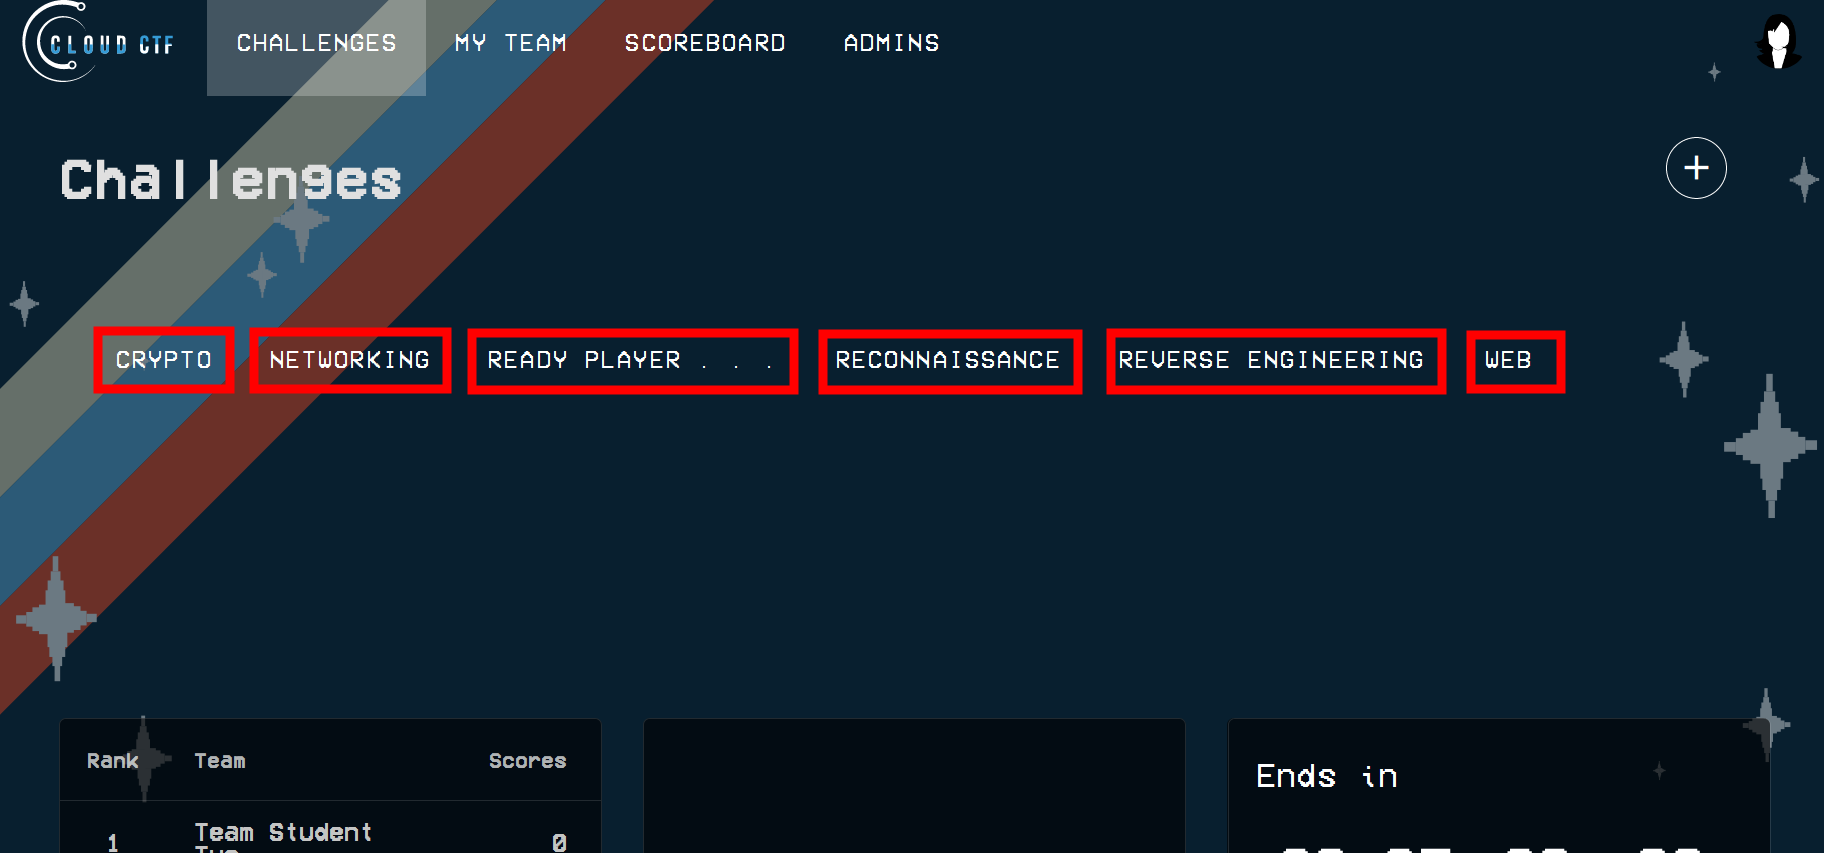 The CTF categories can be found just under the Challenges header, in the middle of the screen.